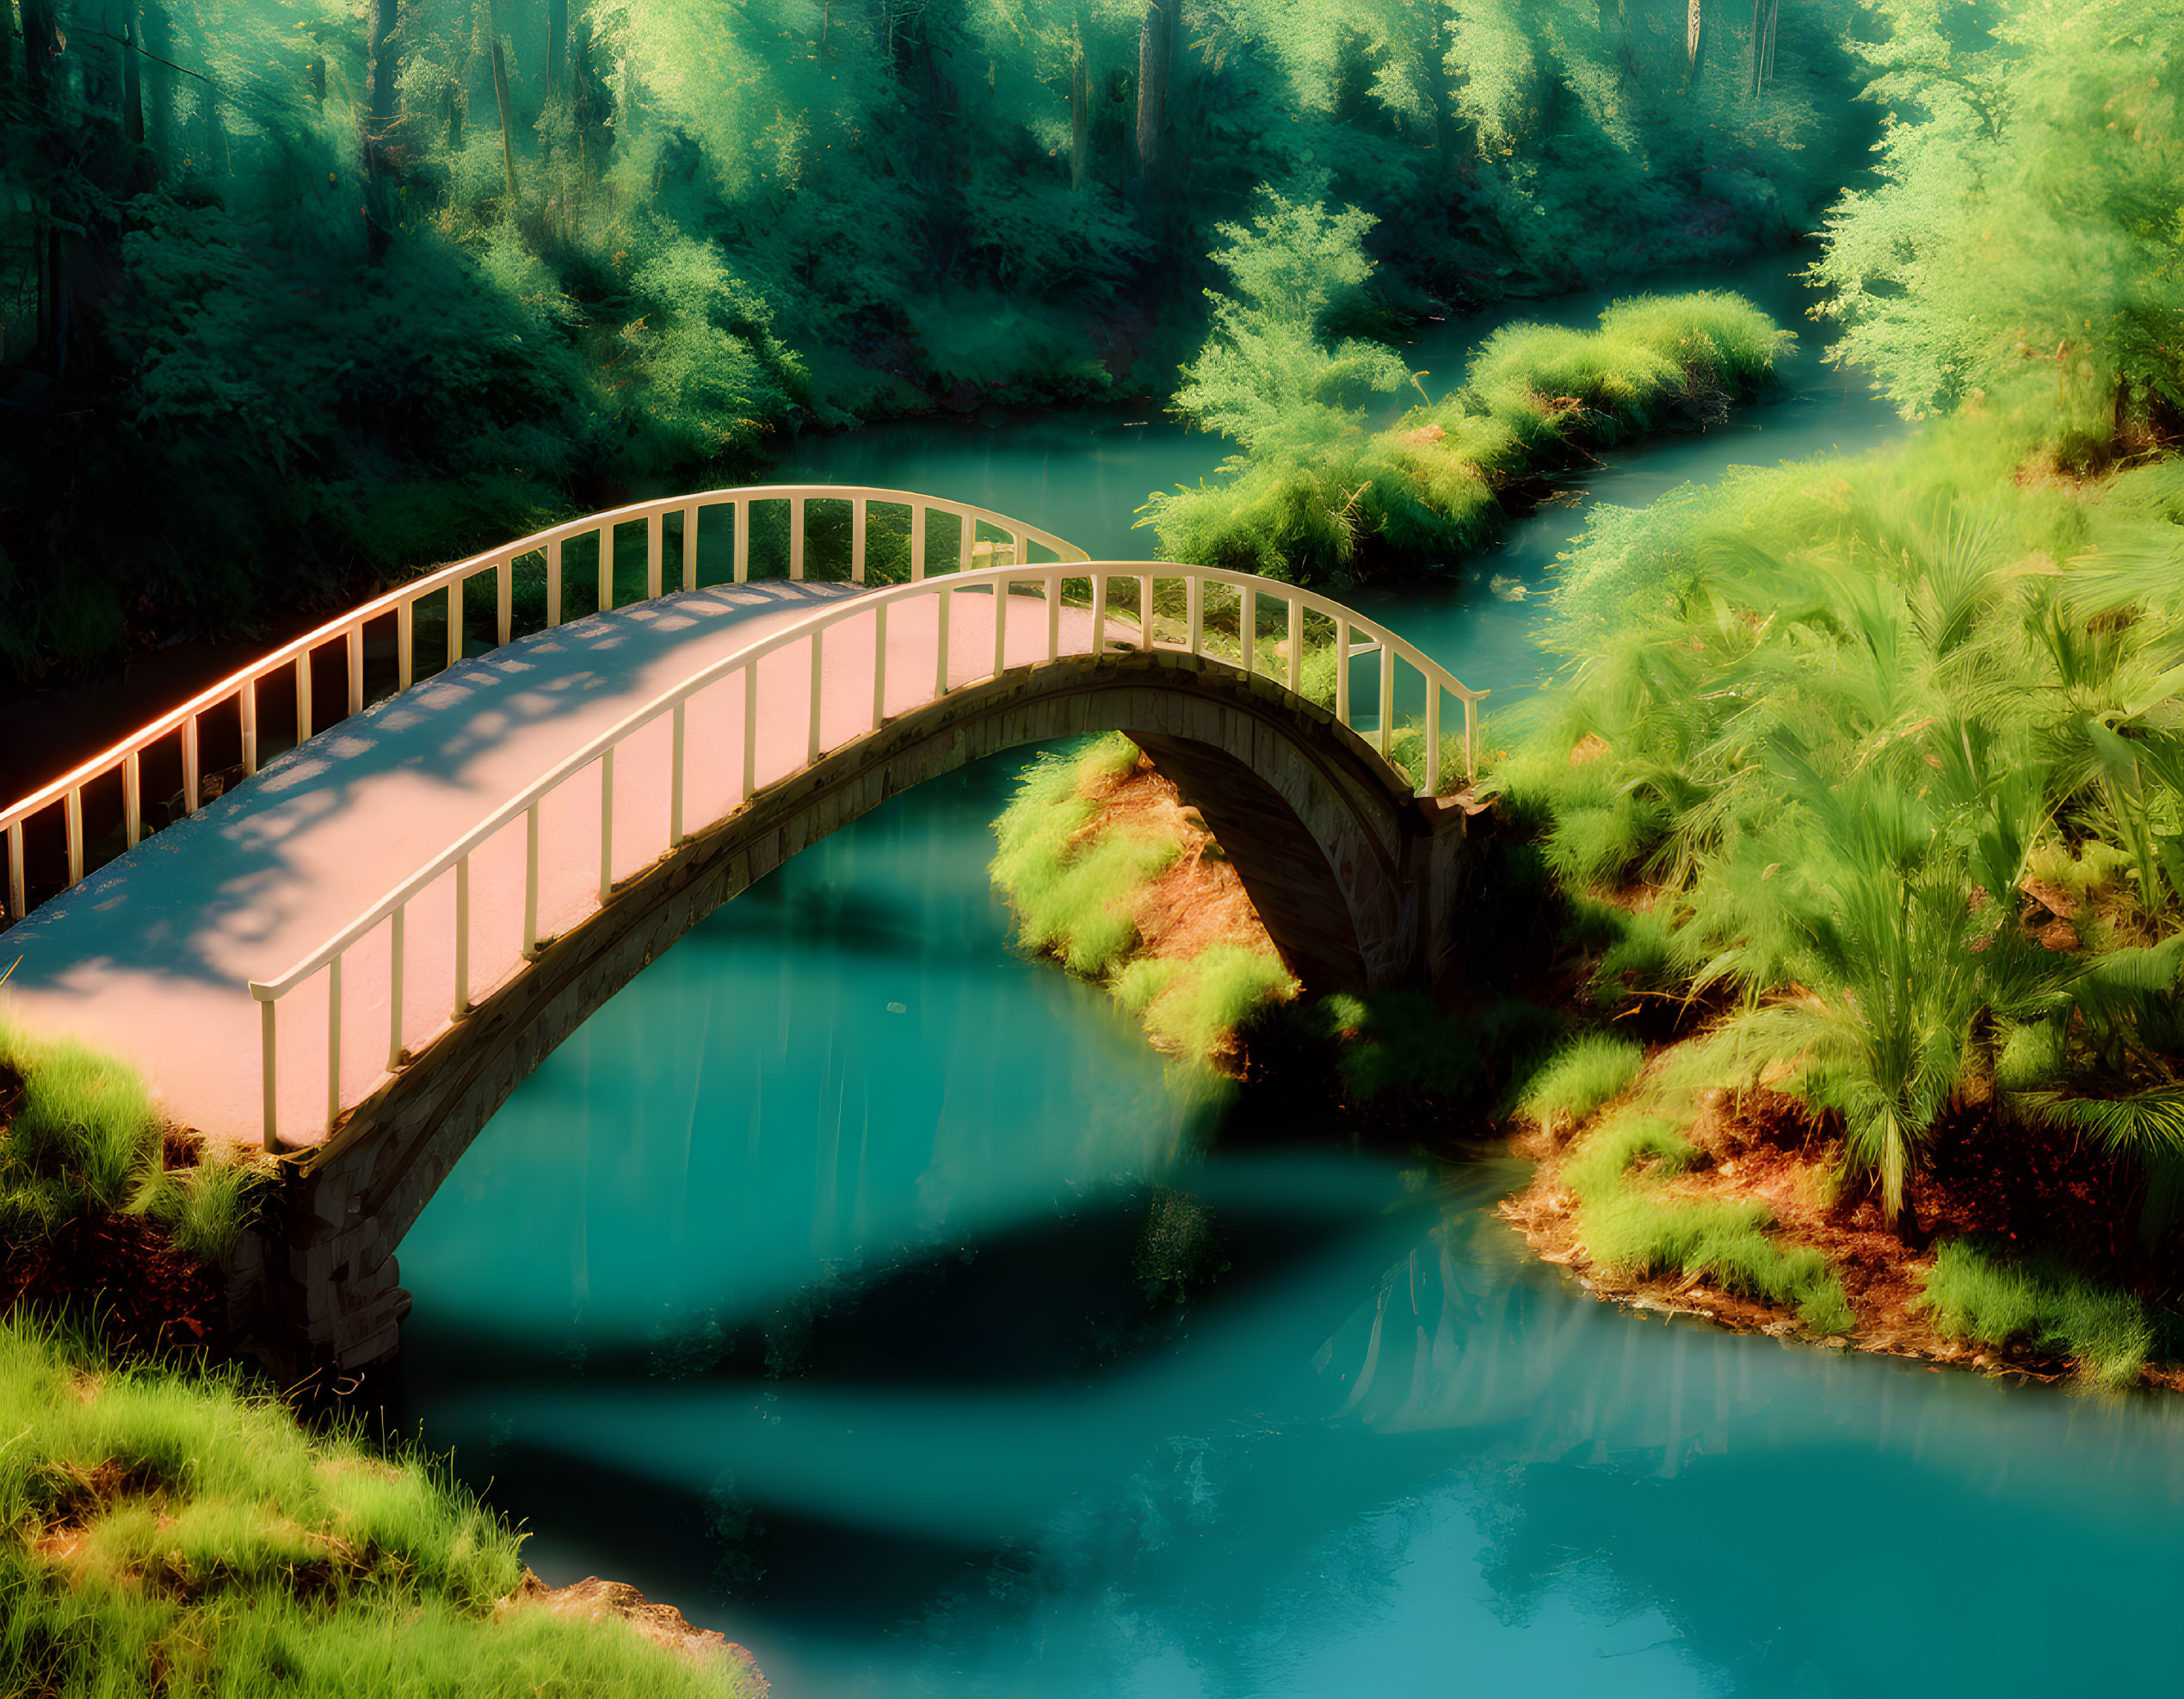 Stone arched bridge over tranquil river in lush greenery